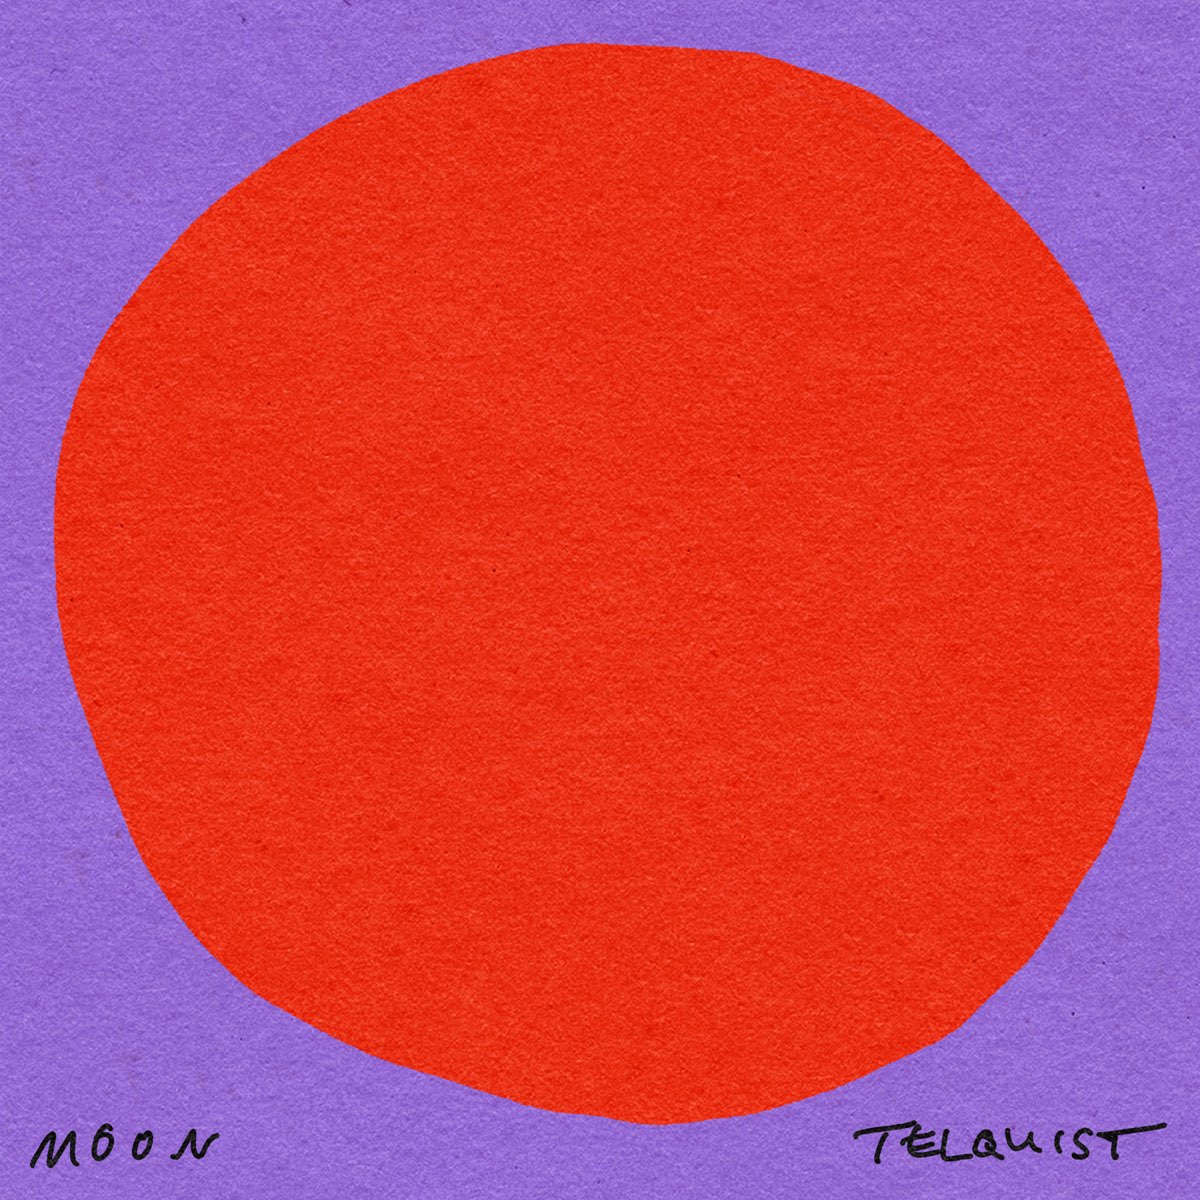 Telquist Moon cover artwork